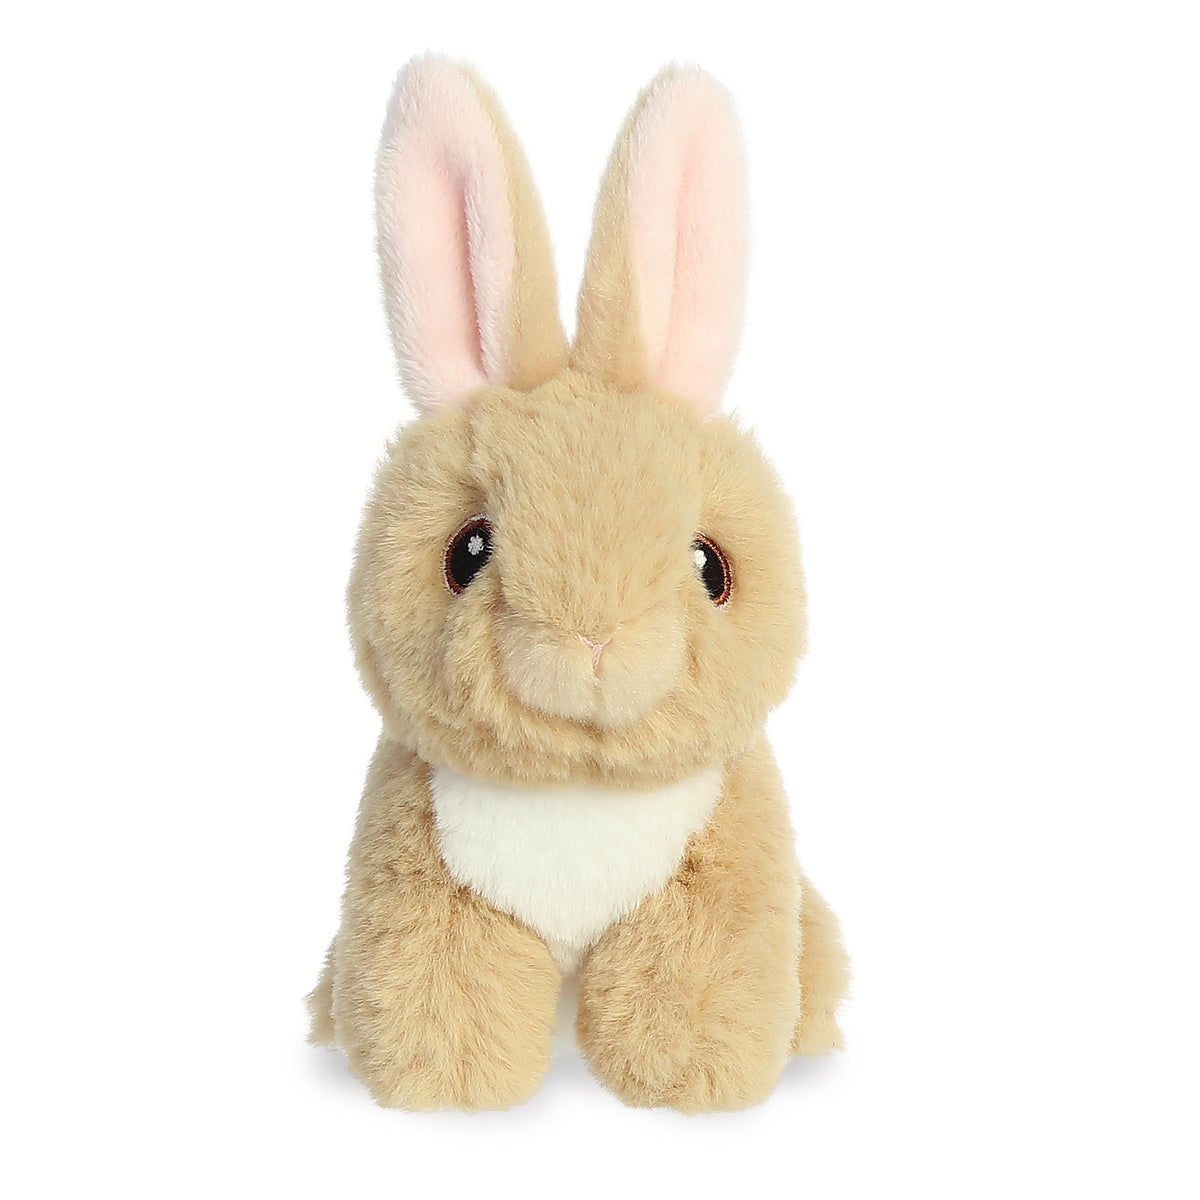 Mini Tan Bunny plush from Aurora's Eco Nation stuffed animals, featuring realistic details and soft texture